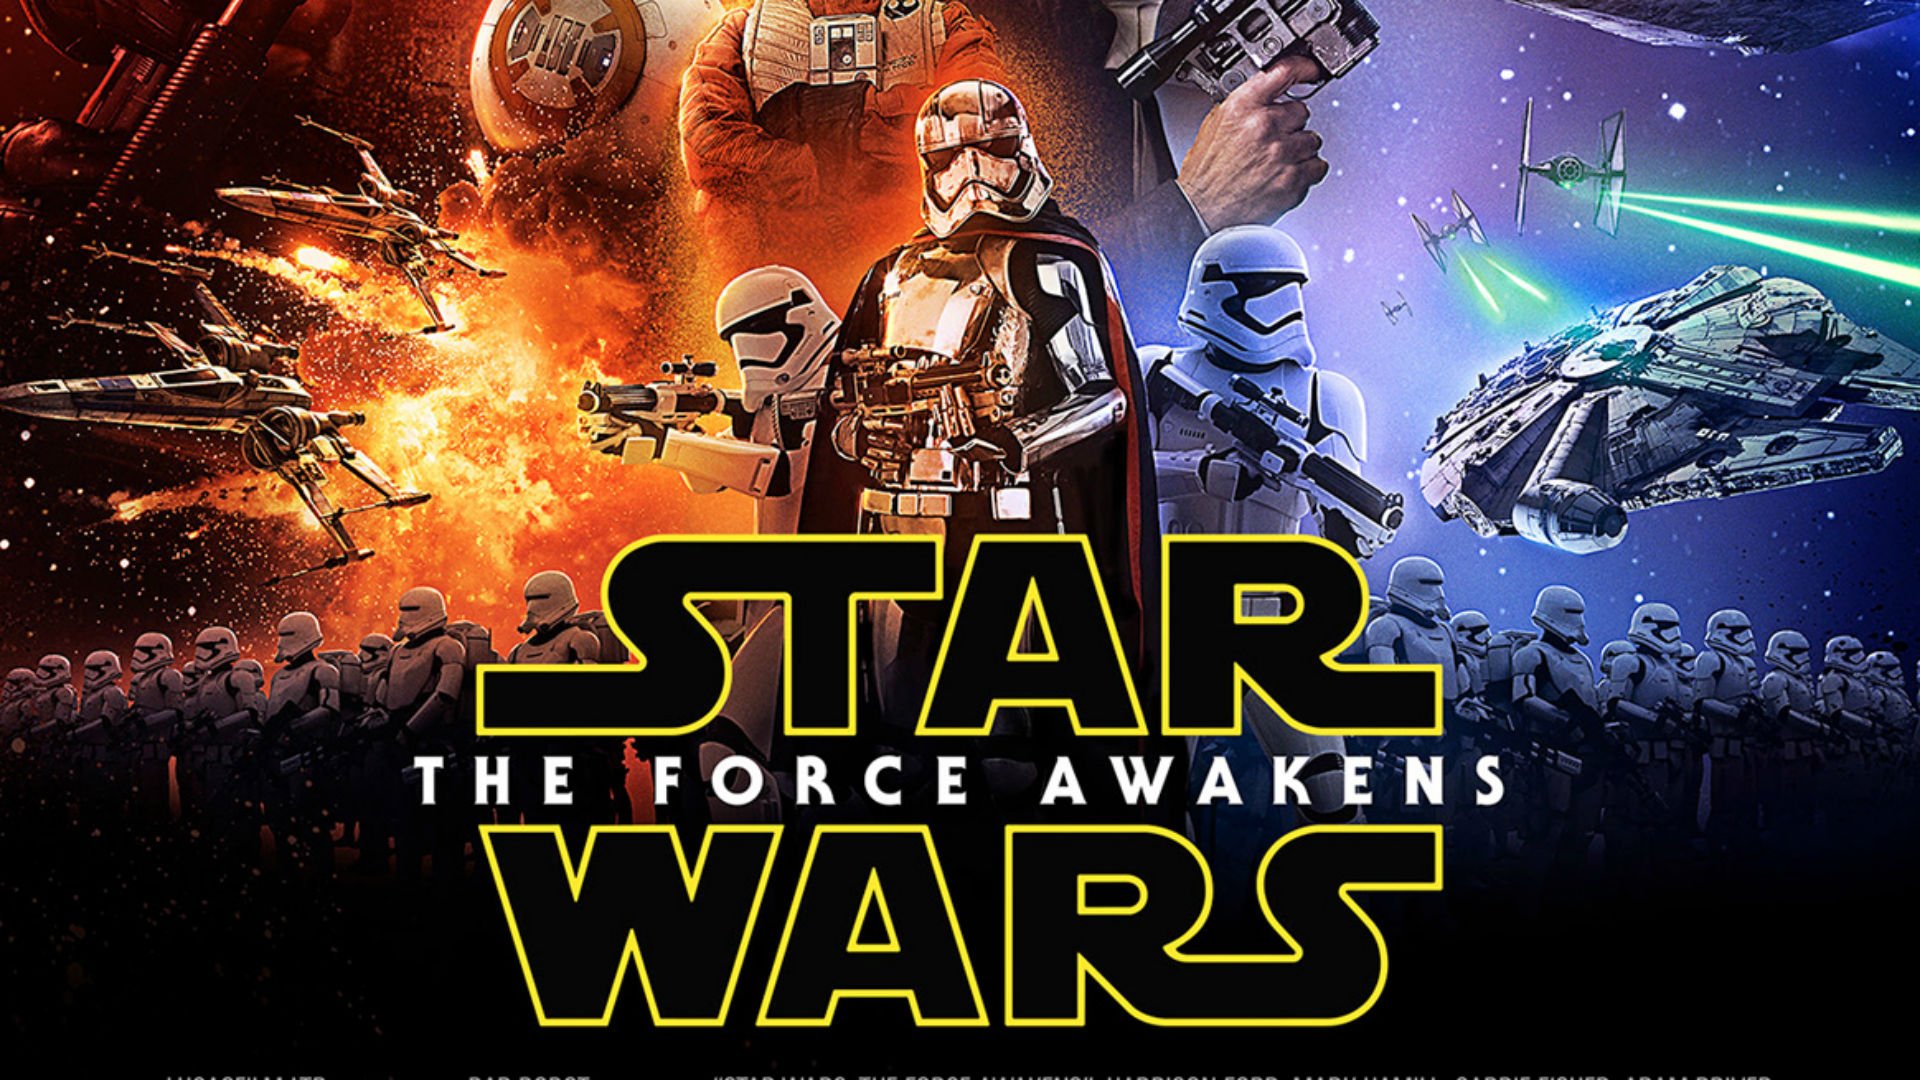 the force awakens game download free